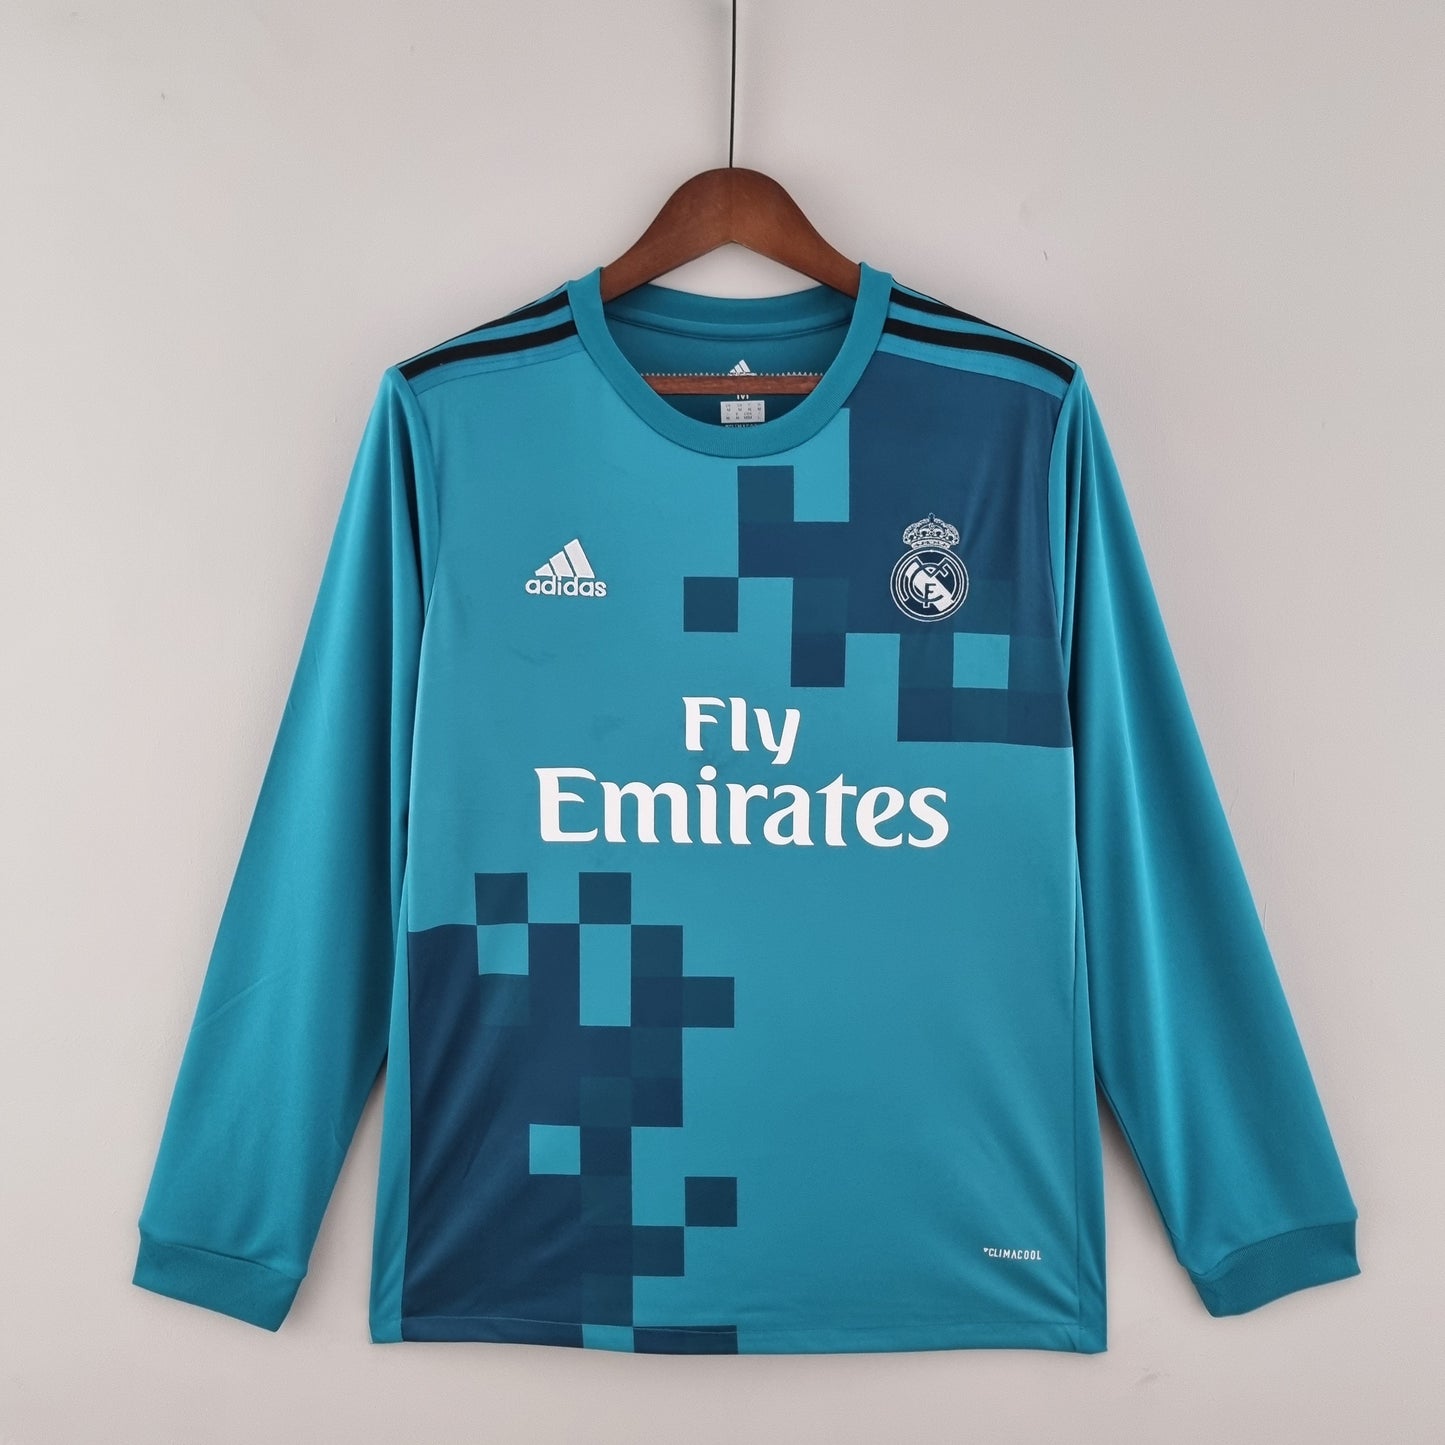 REAL MADRID 2017 - 2018 THIRD JERSEY LONG-SLEEVED